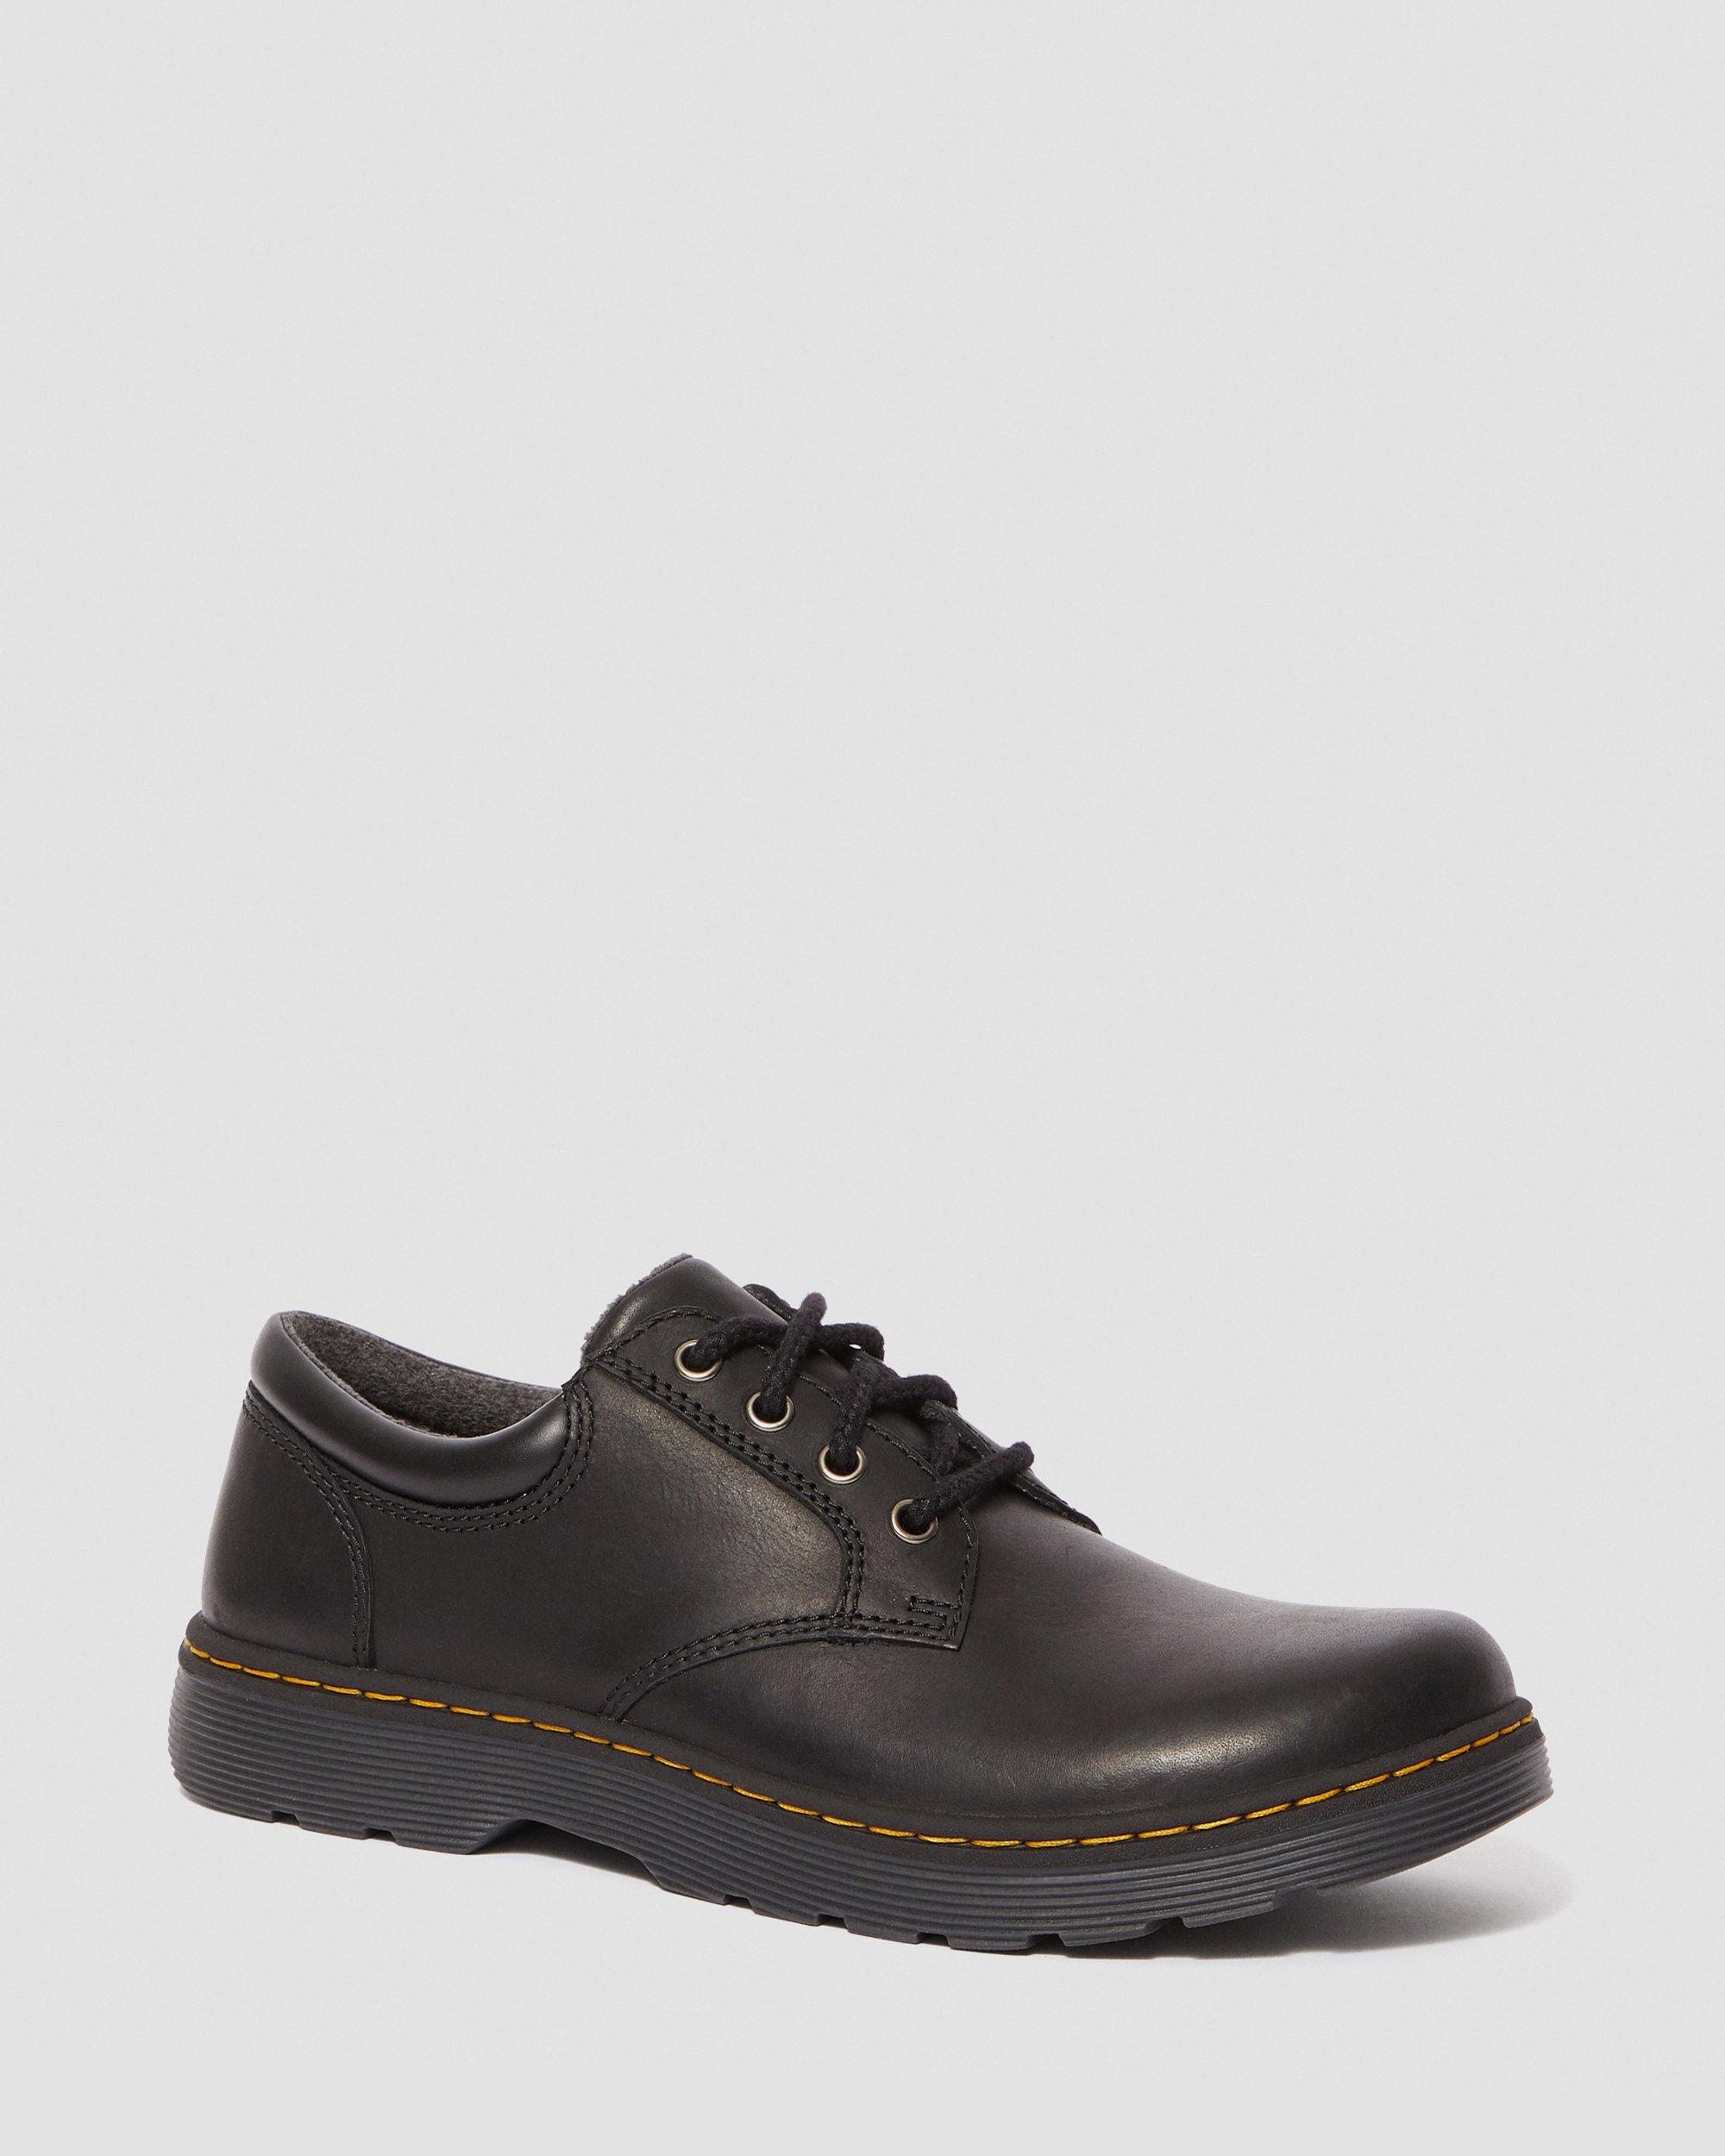 TIPTON LOW LEATHER LACE UP SHOE | Dr. Martens UK